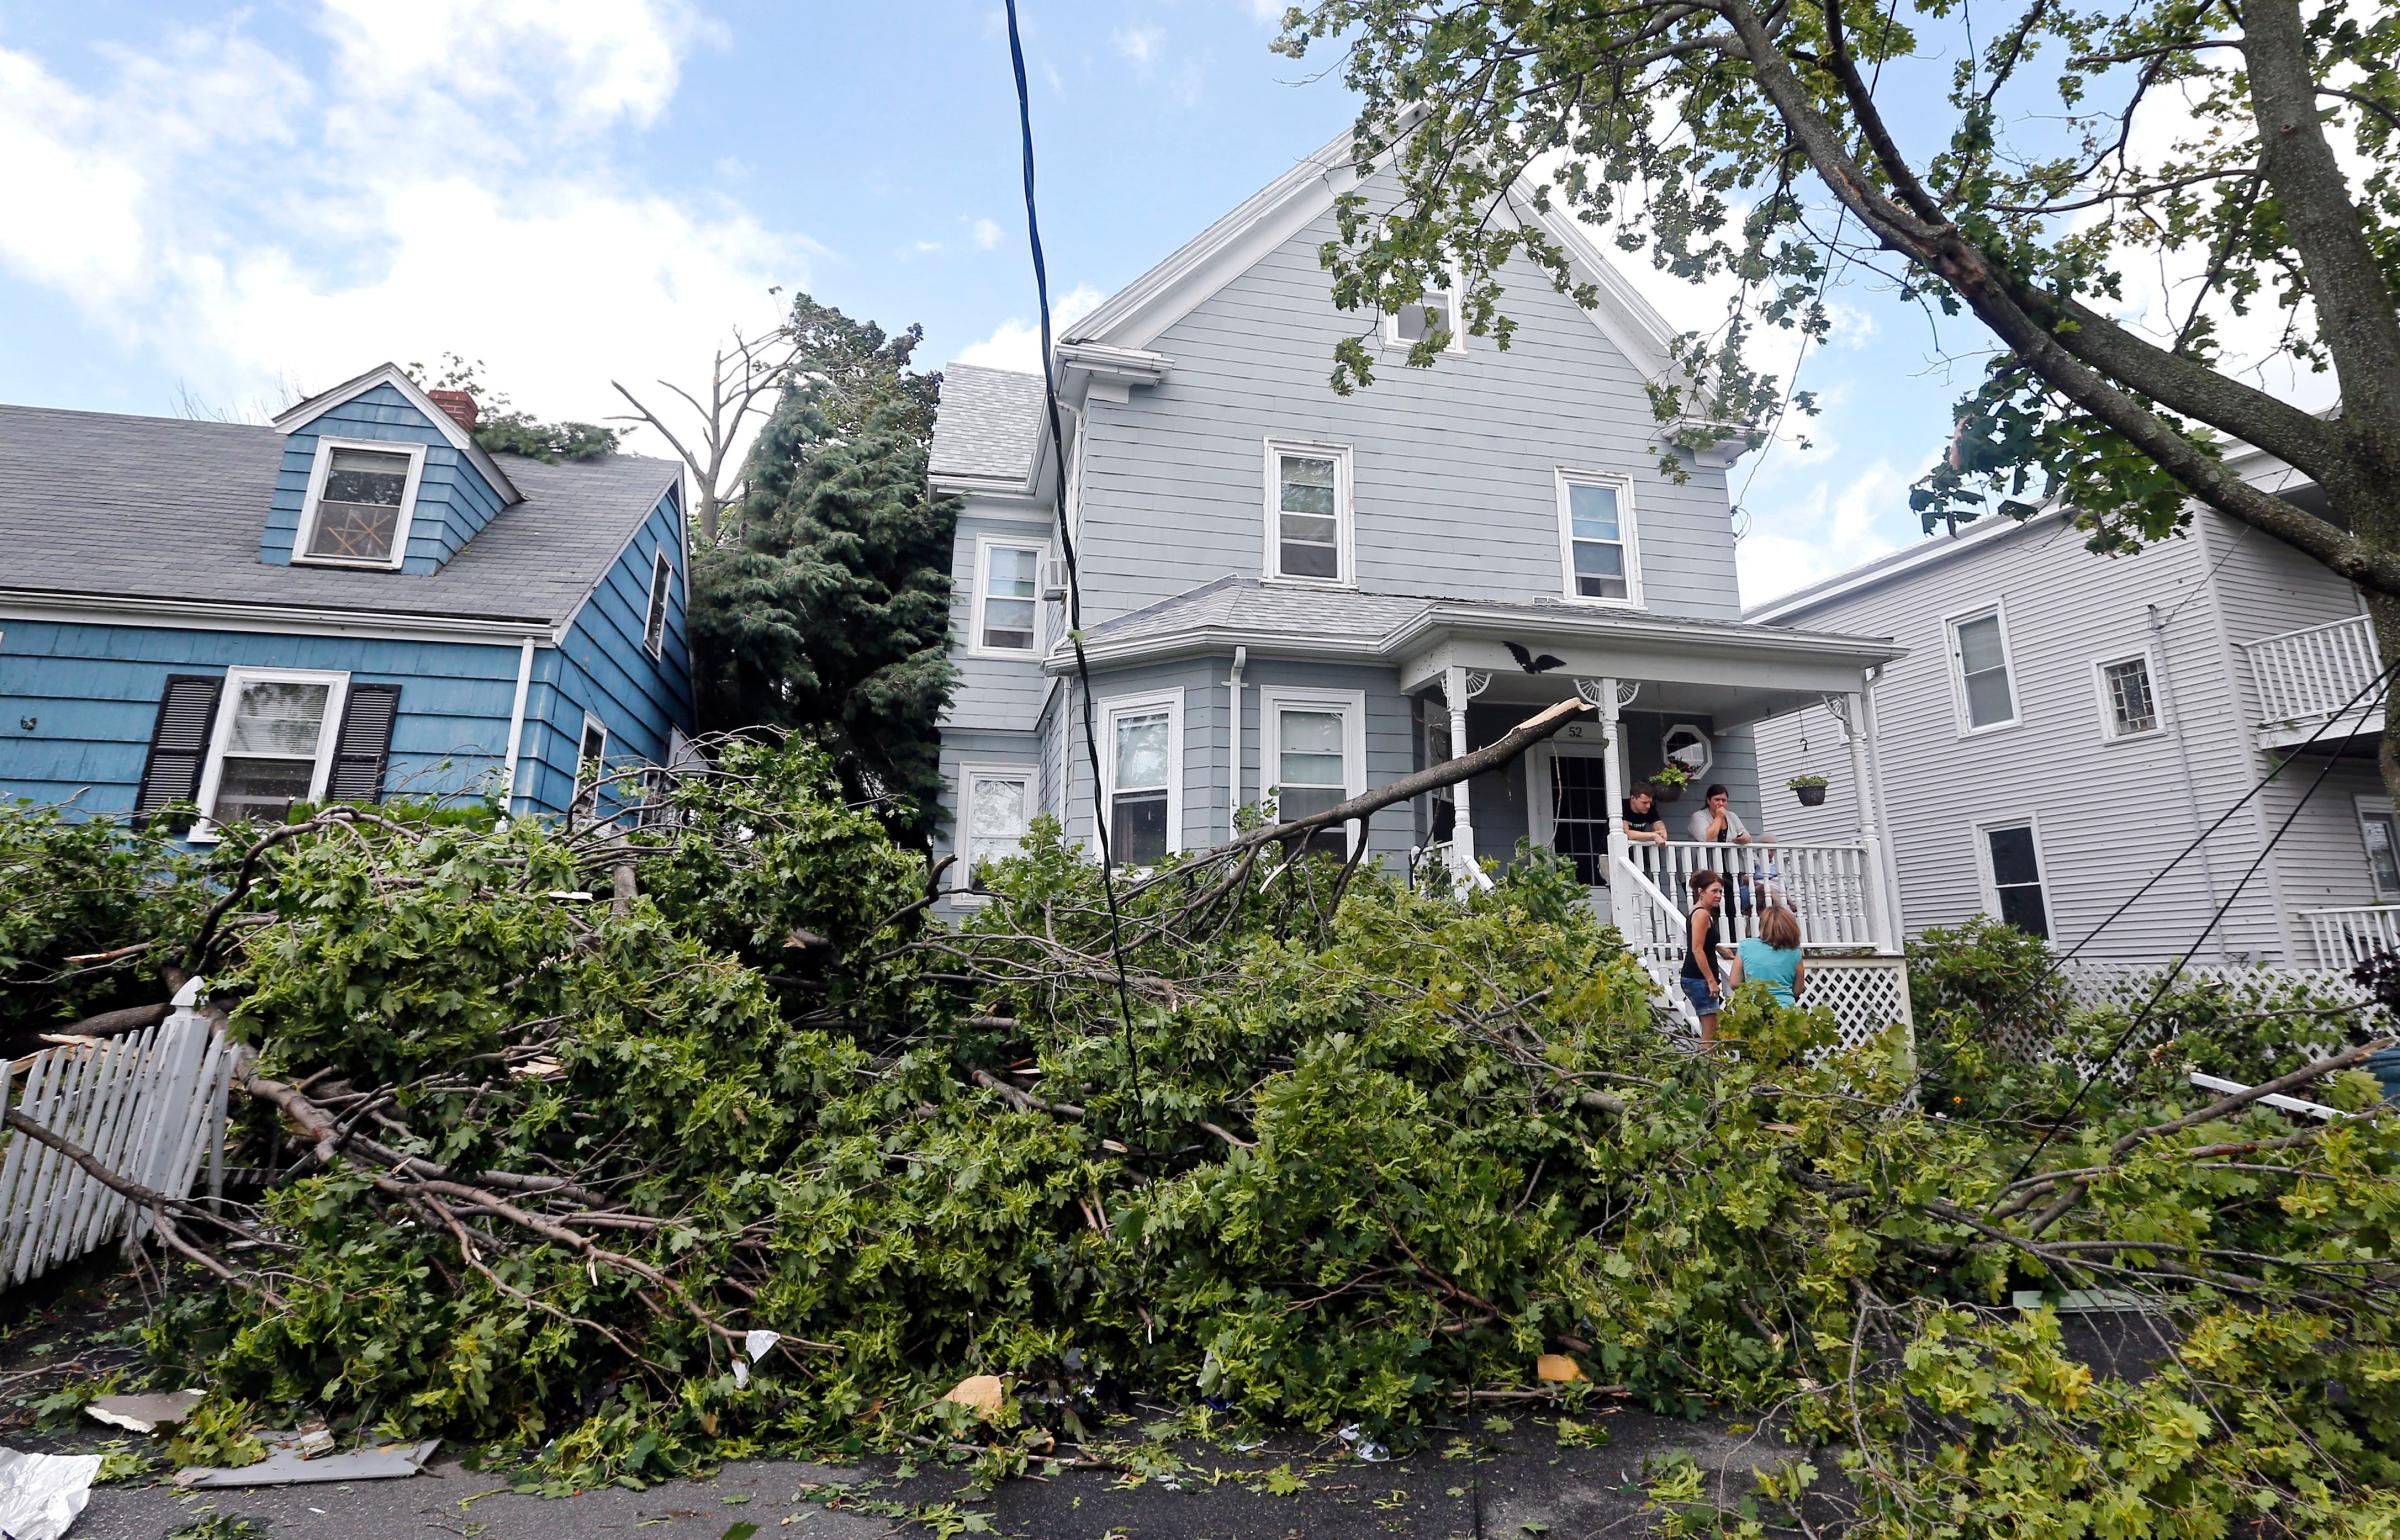 Downed trees and power lines lay in front of homes in Revere, Mass., on July 28, 2014 after a tornado touched down.